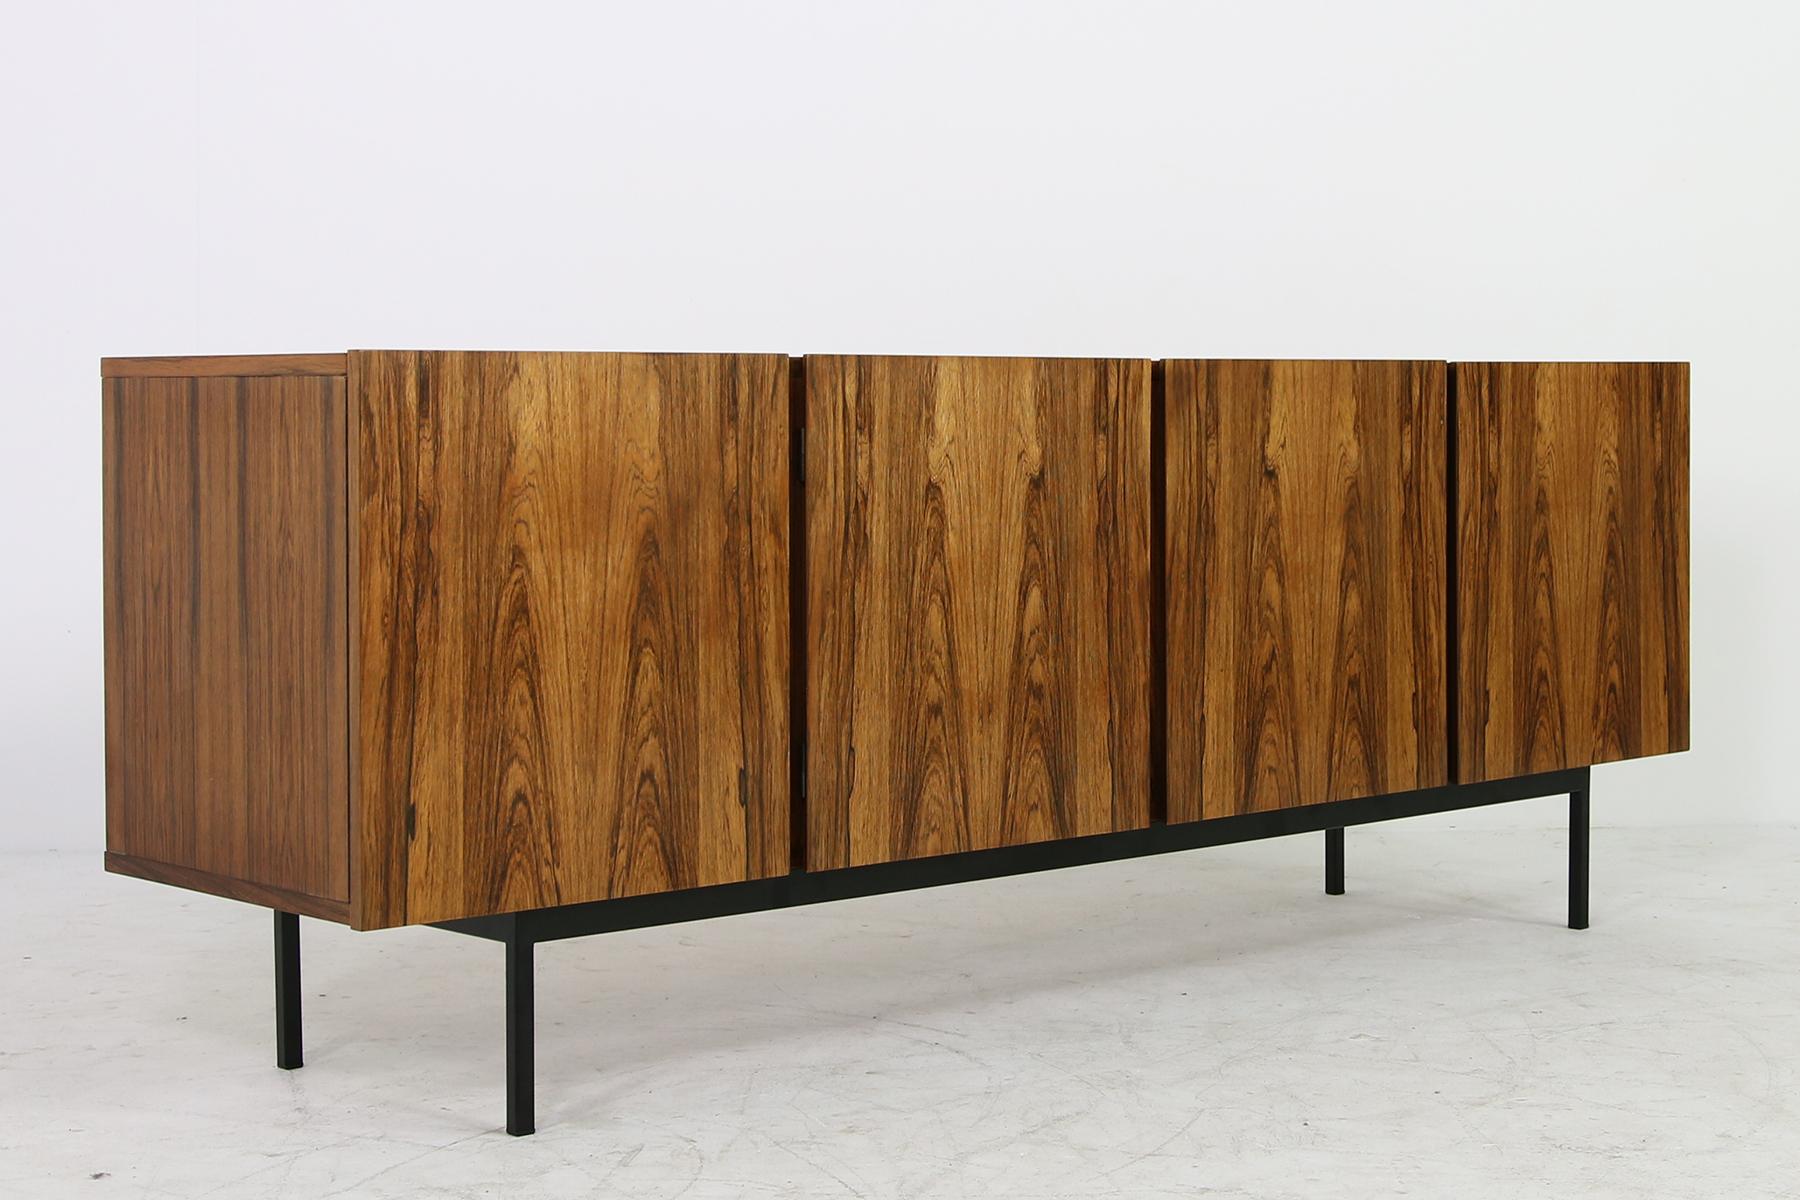 Beautiful 1960s Minimalist sideboard, shelves and drawers inside, great authentic condition, unknown designer, very high quality, probably made to order or an unique item. Beautiful wood outside and maple wood inside. Very rare model, super nice